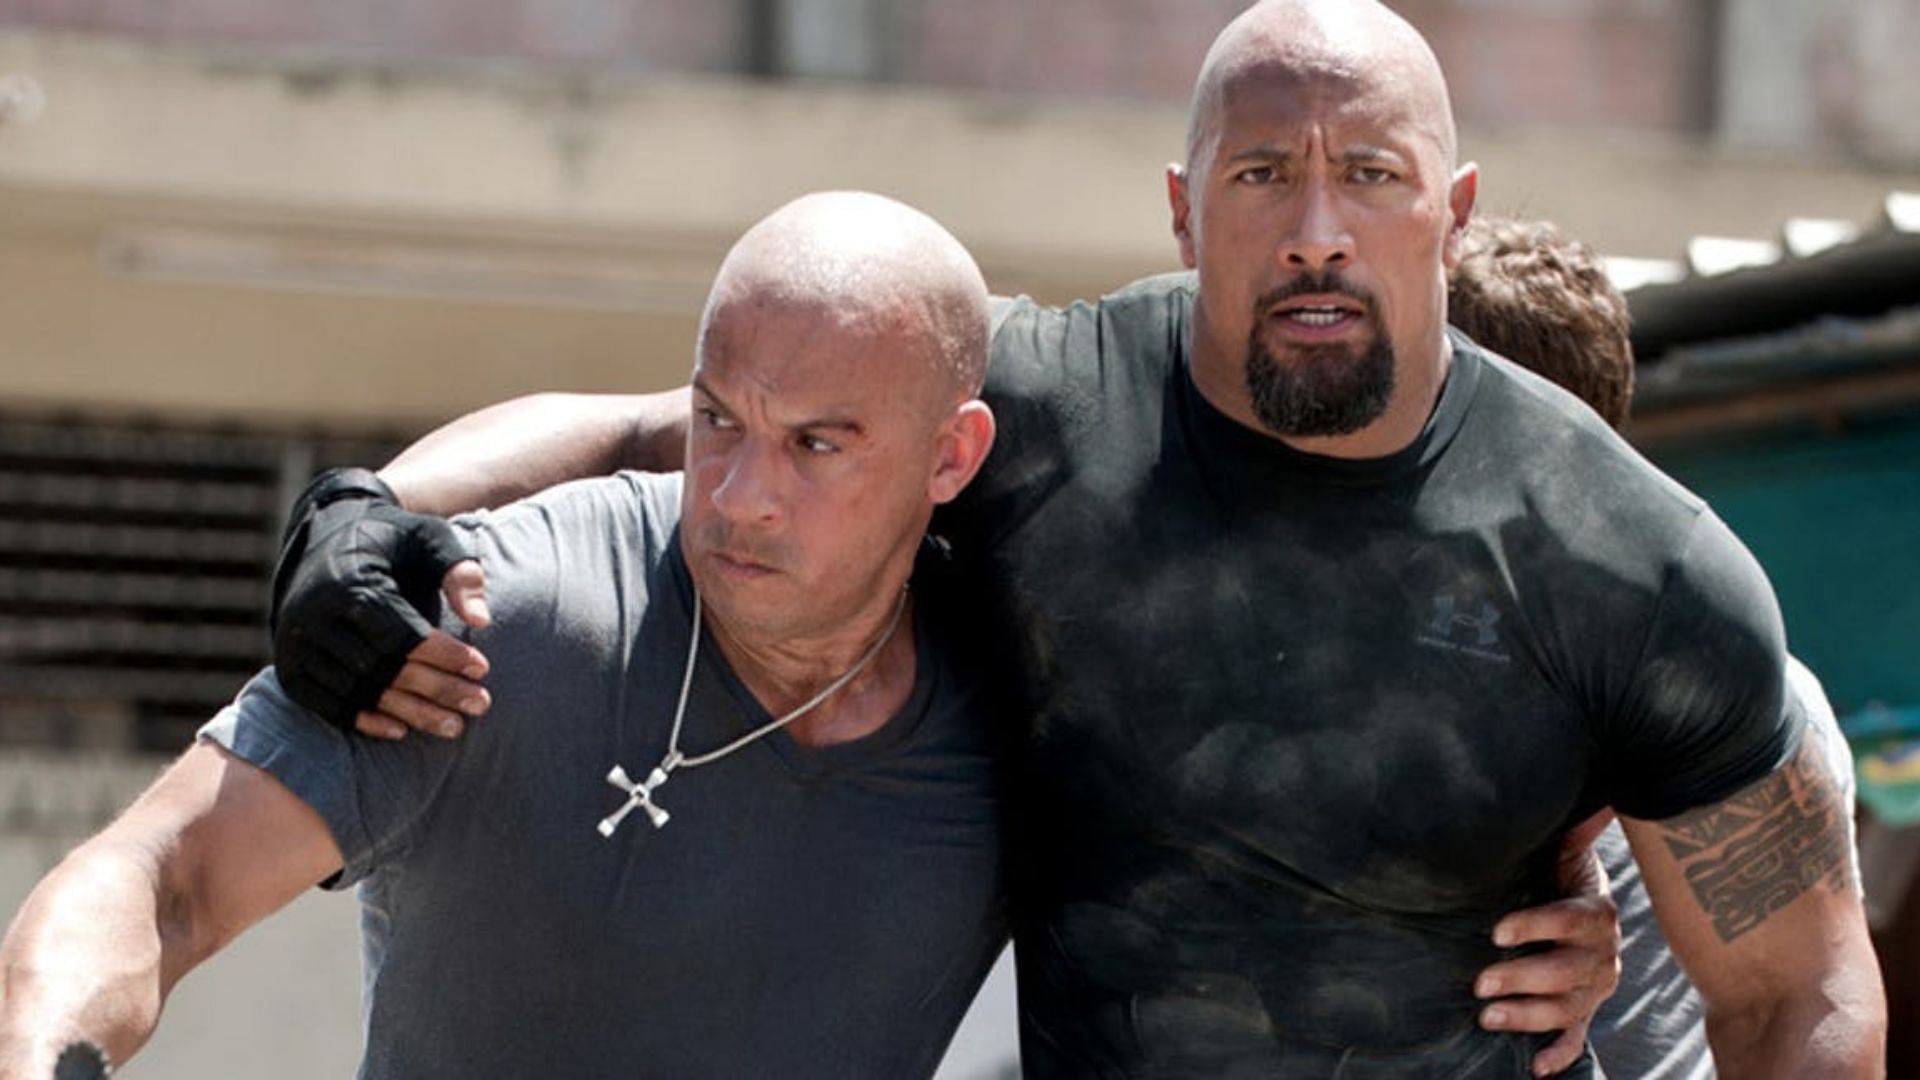 Fast and Furious cast Vin Diesel and Dwayne 